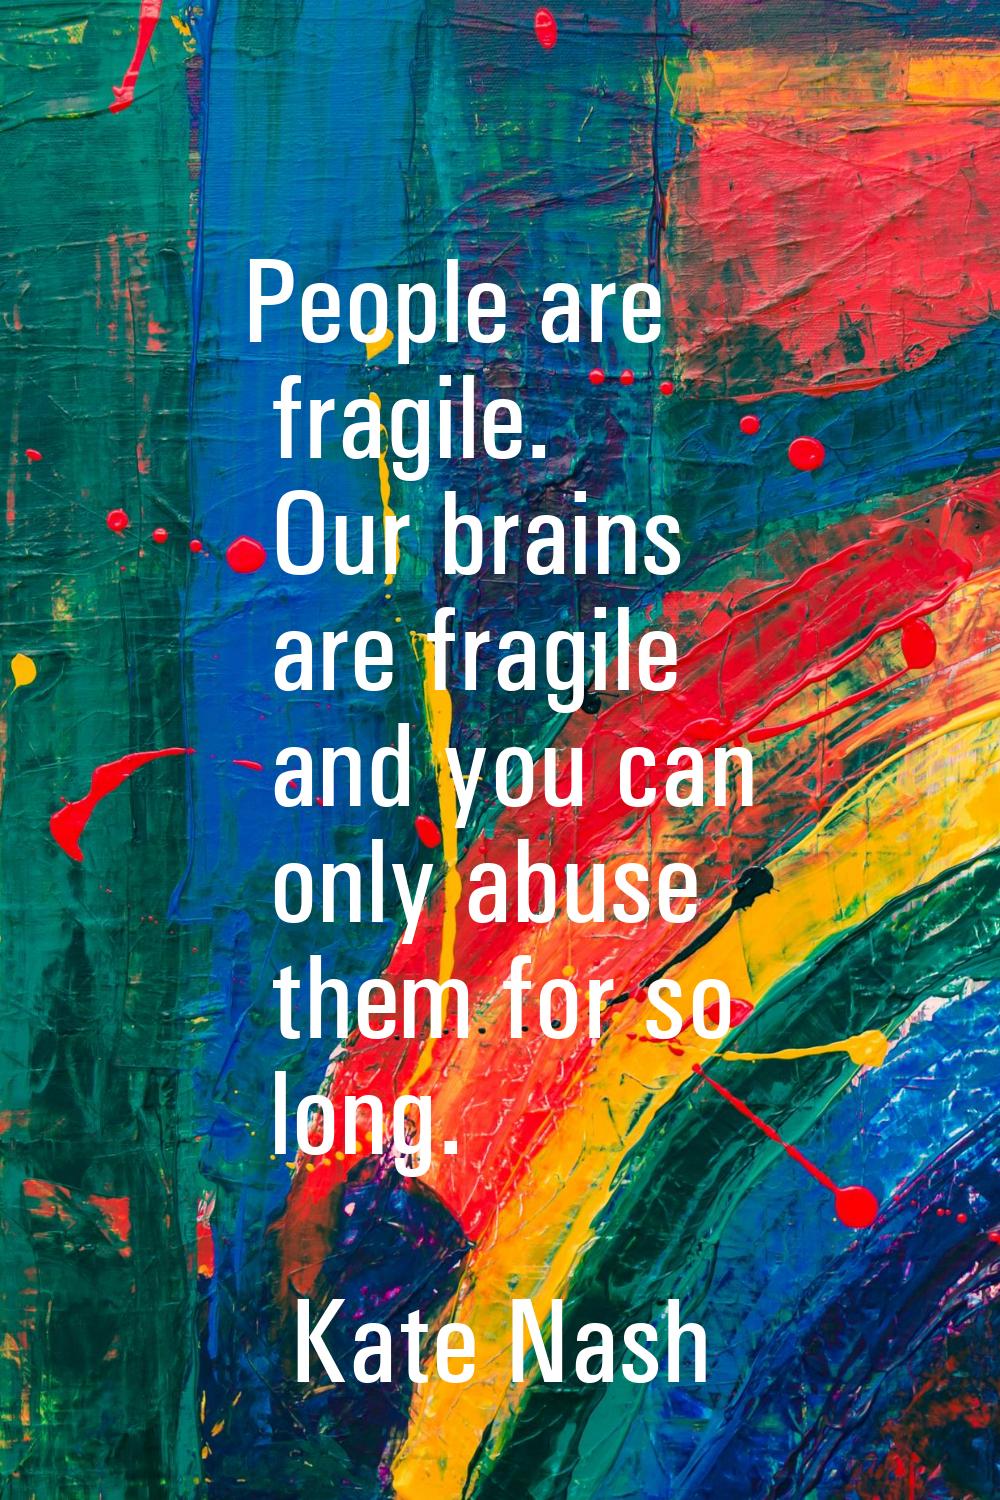 People are fragile. Our brains are fragile and you can only abuse them for so long.